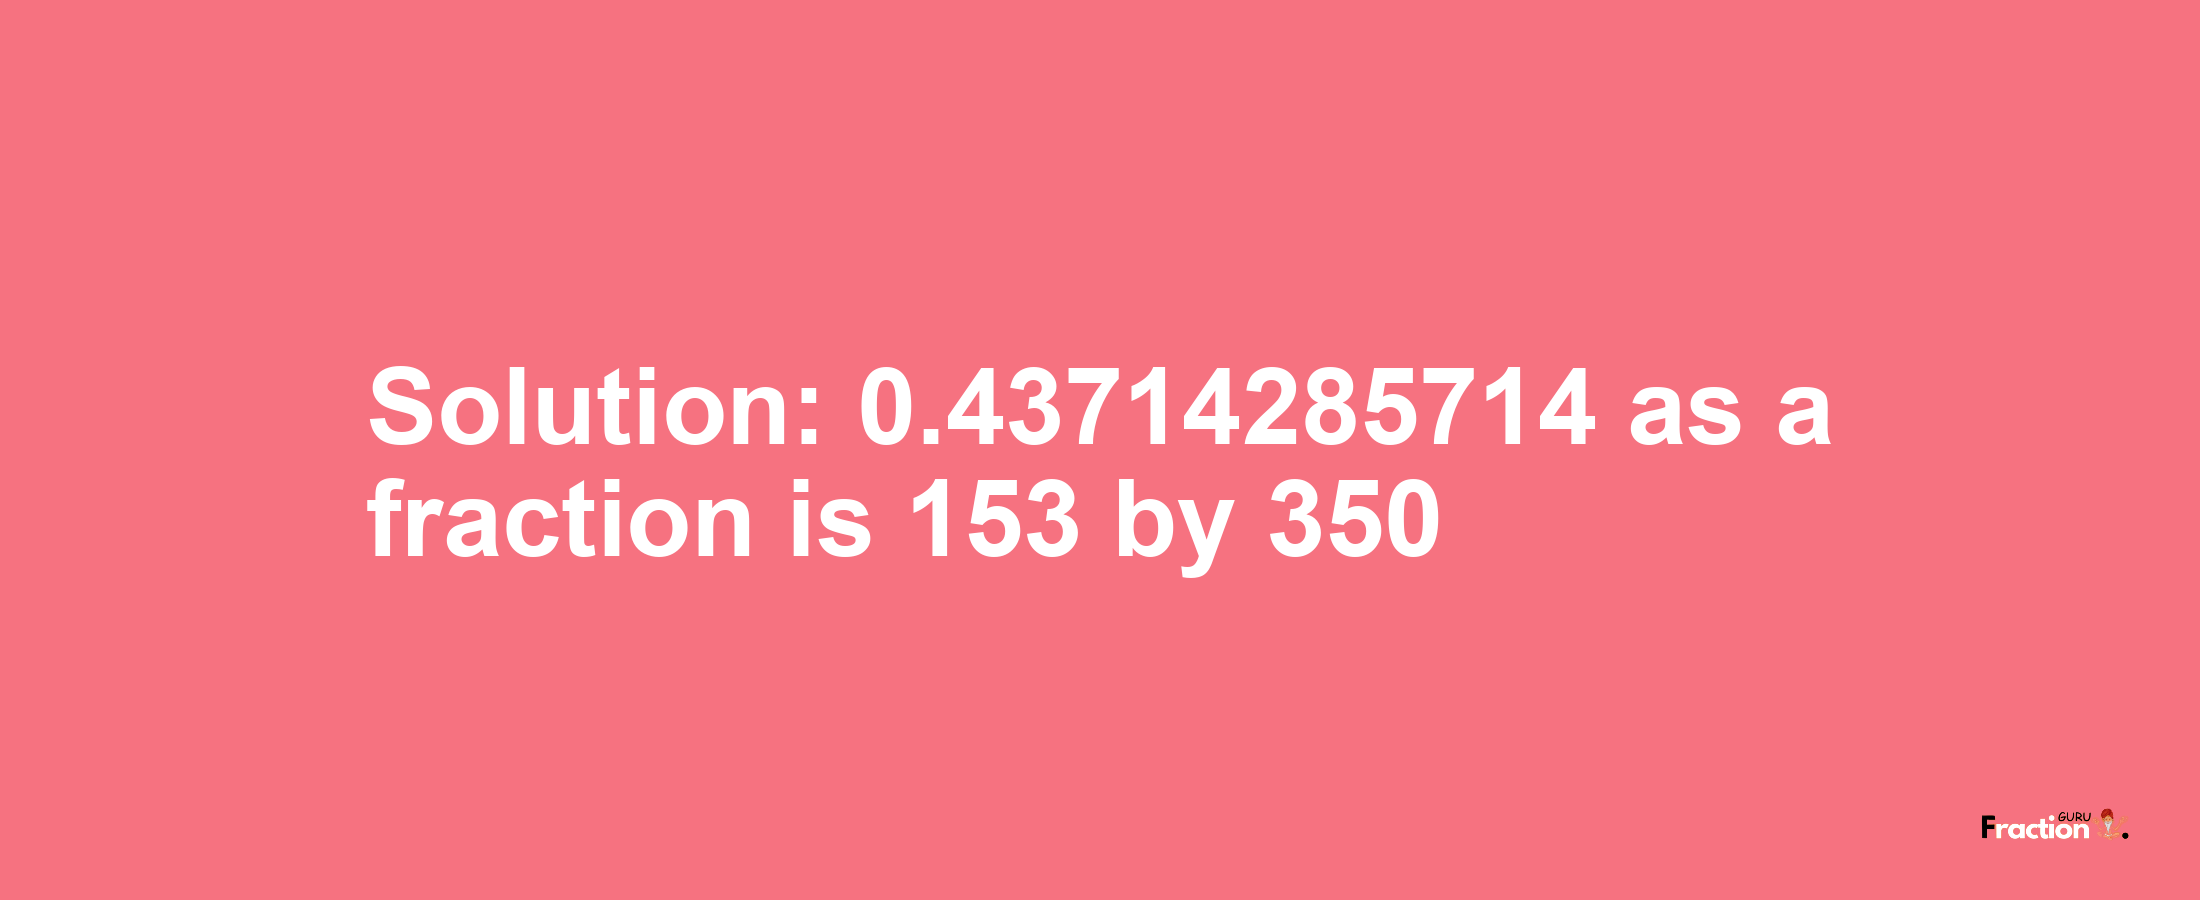 Solution:0.43714285714 as a fraction is 153/350